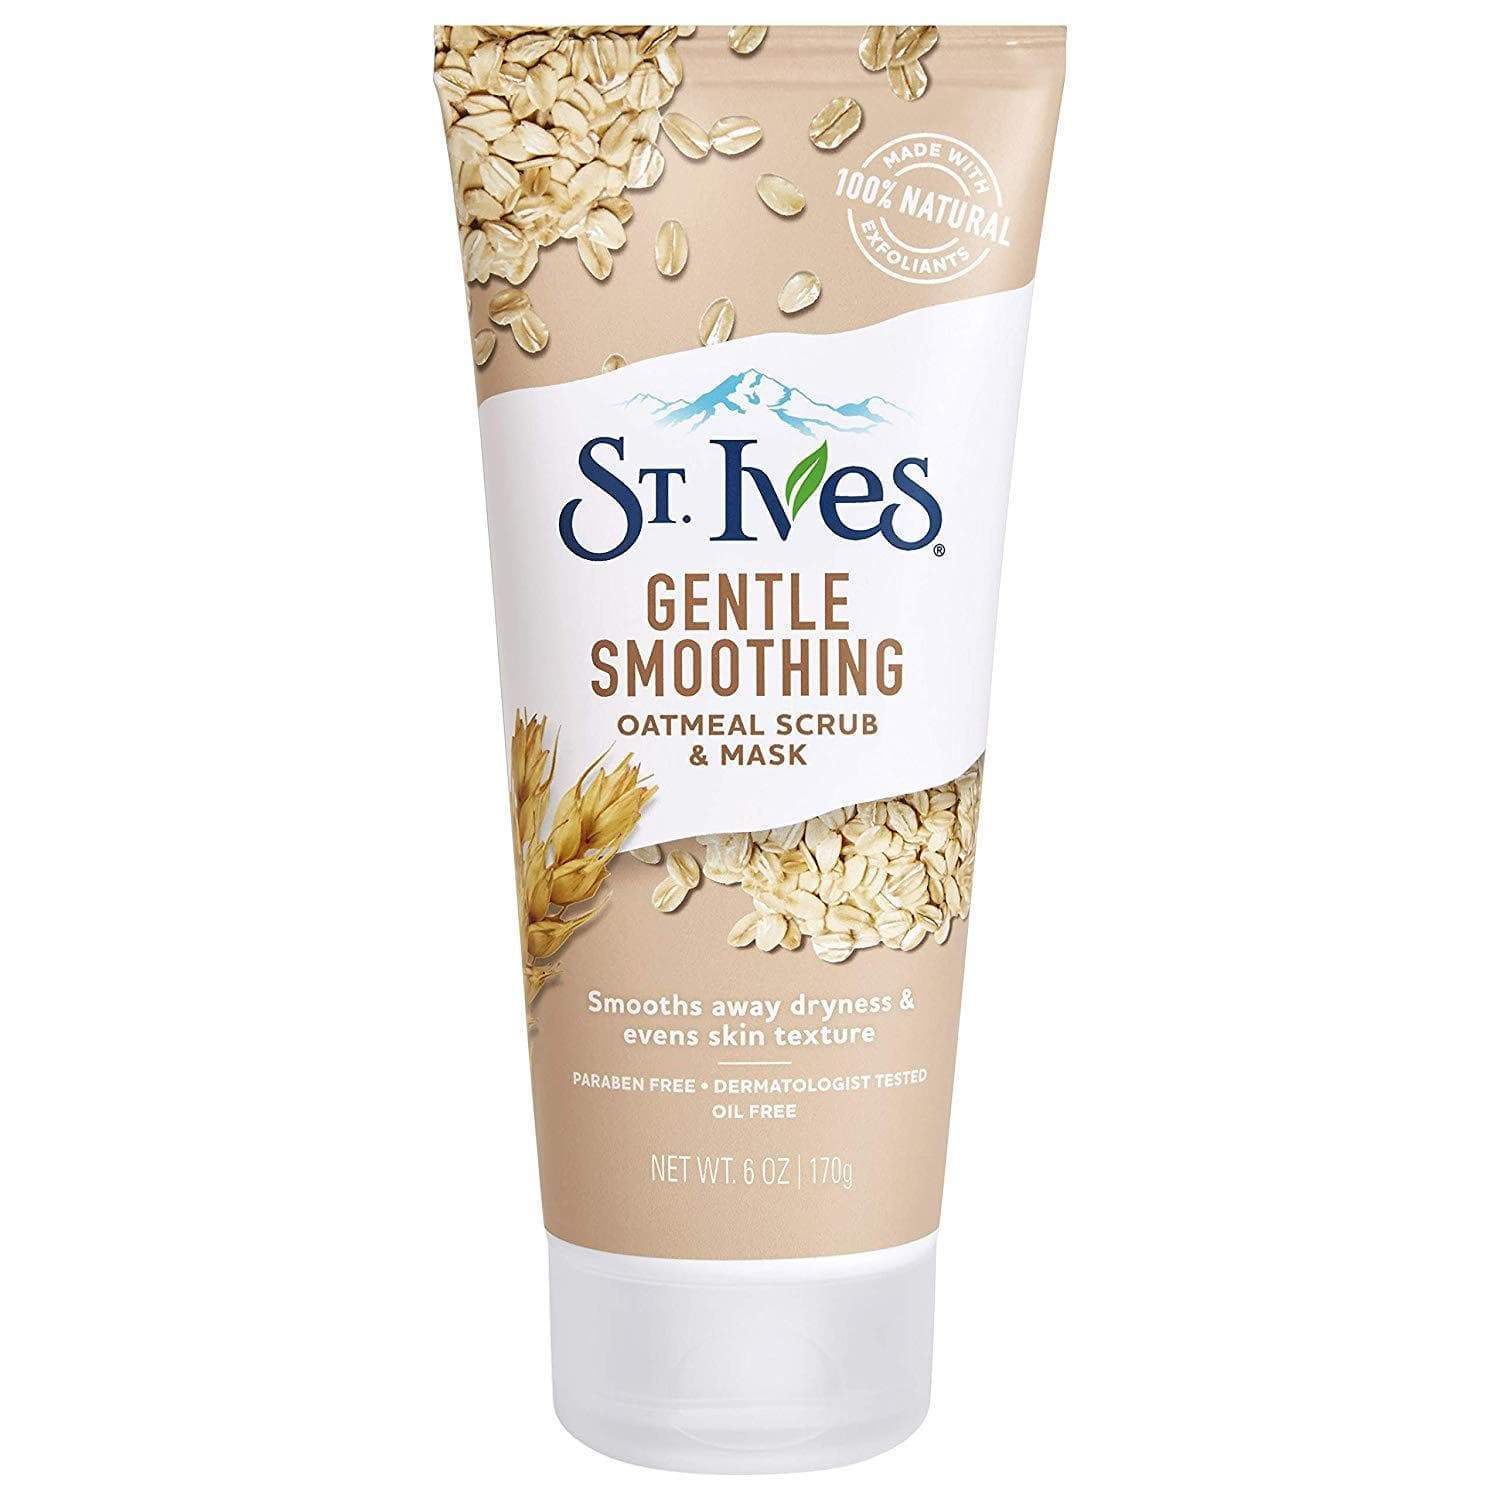 St Ives Gentle Smoothing Face Scrub and Mask, Oatmeal Minoustore